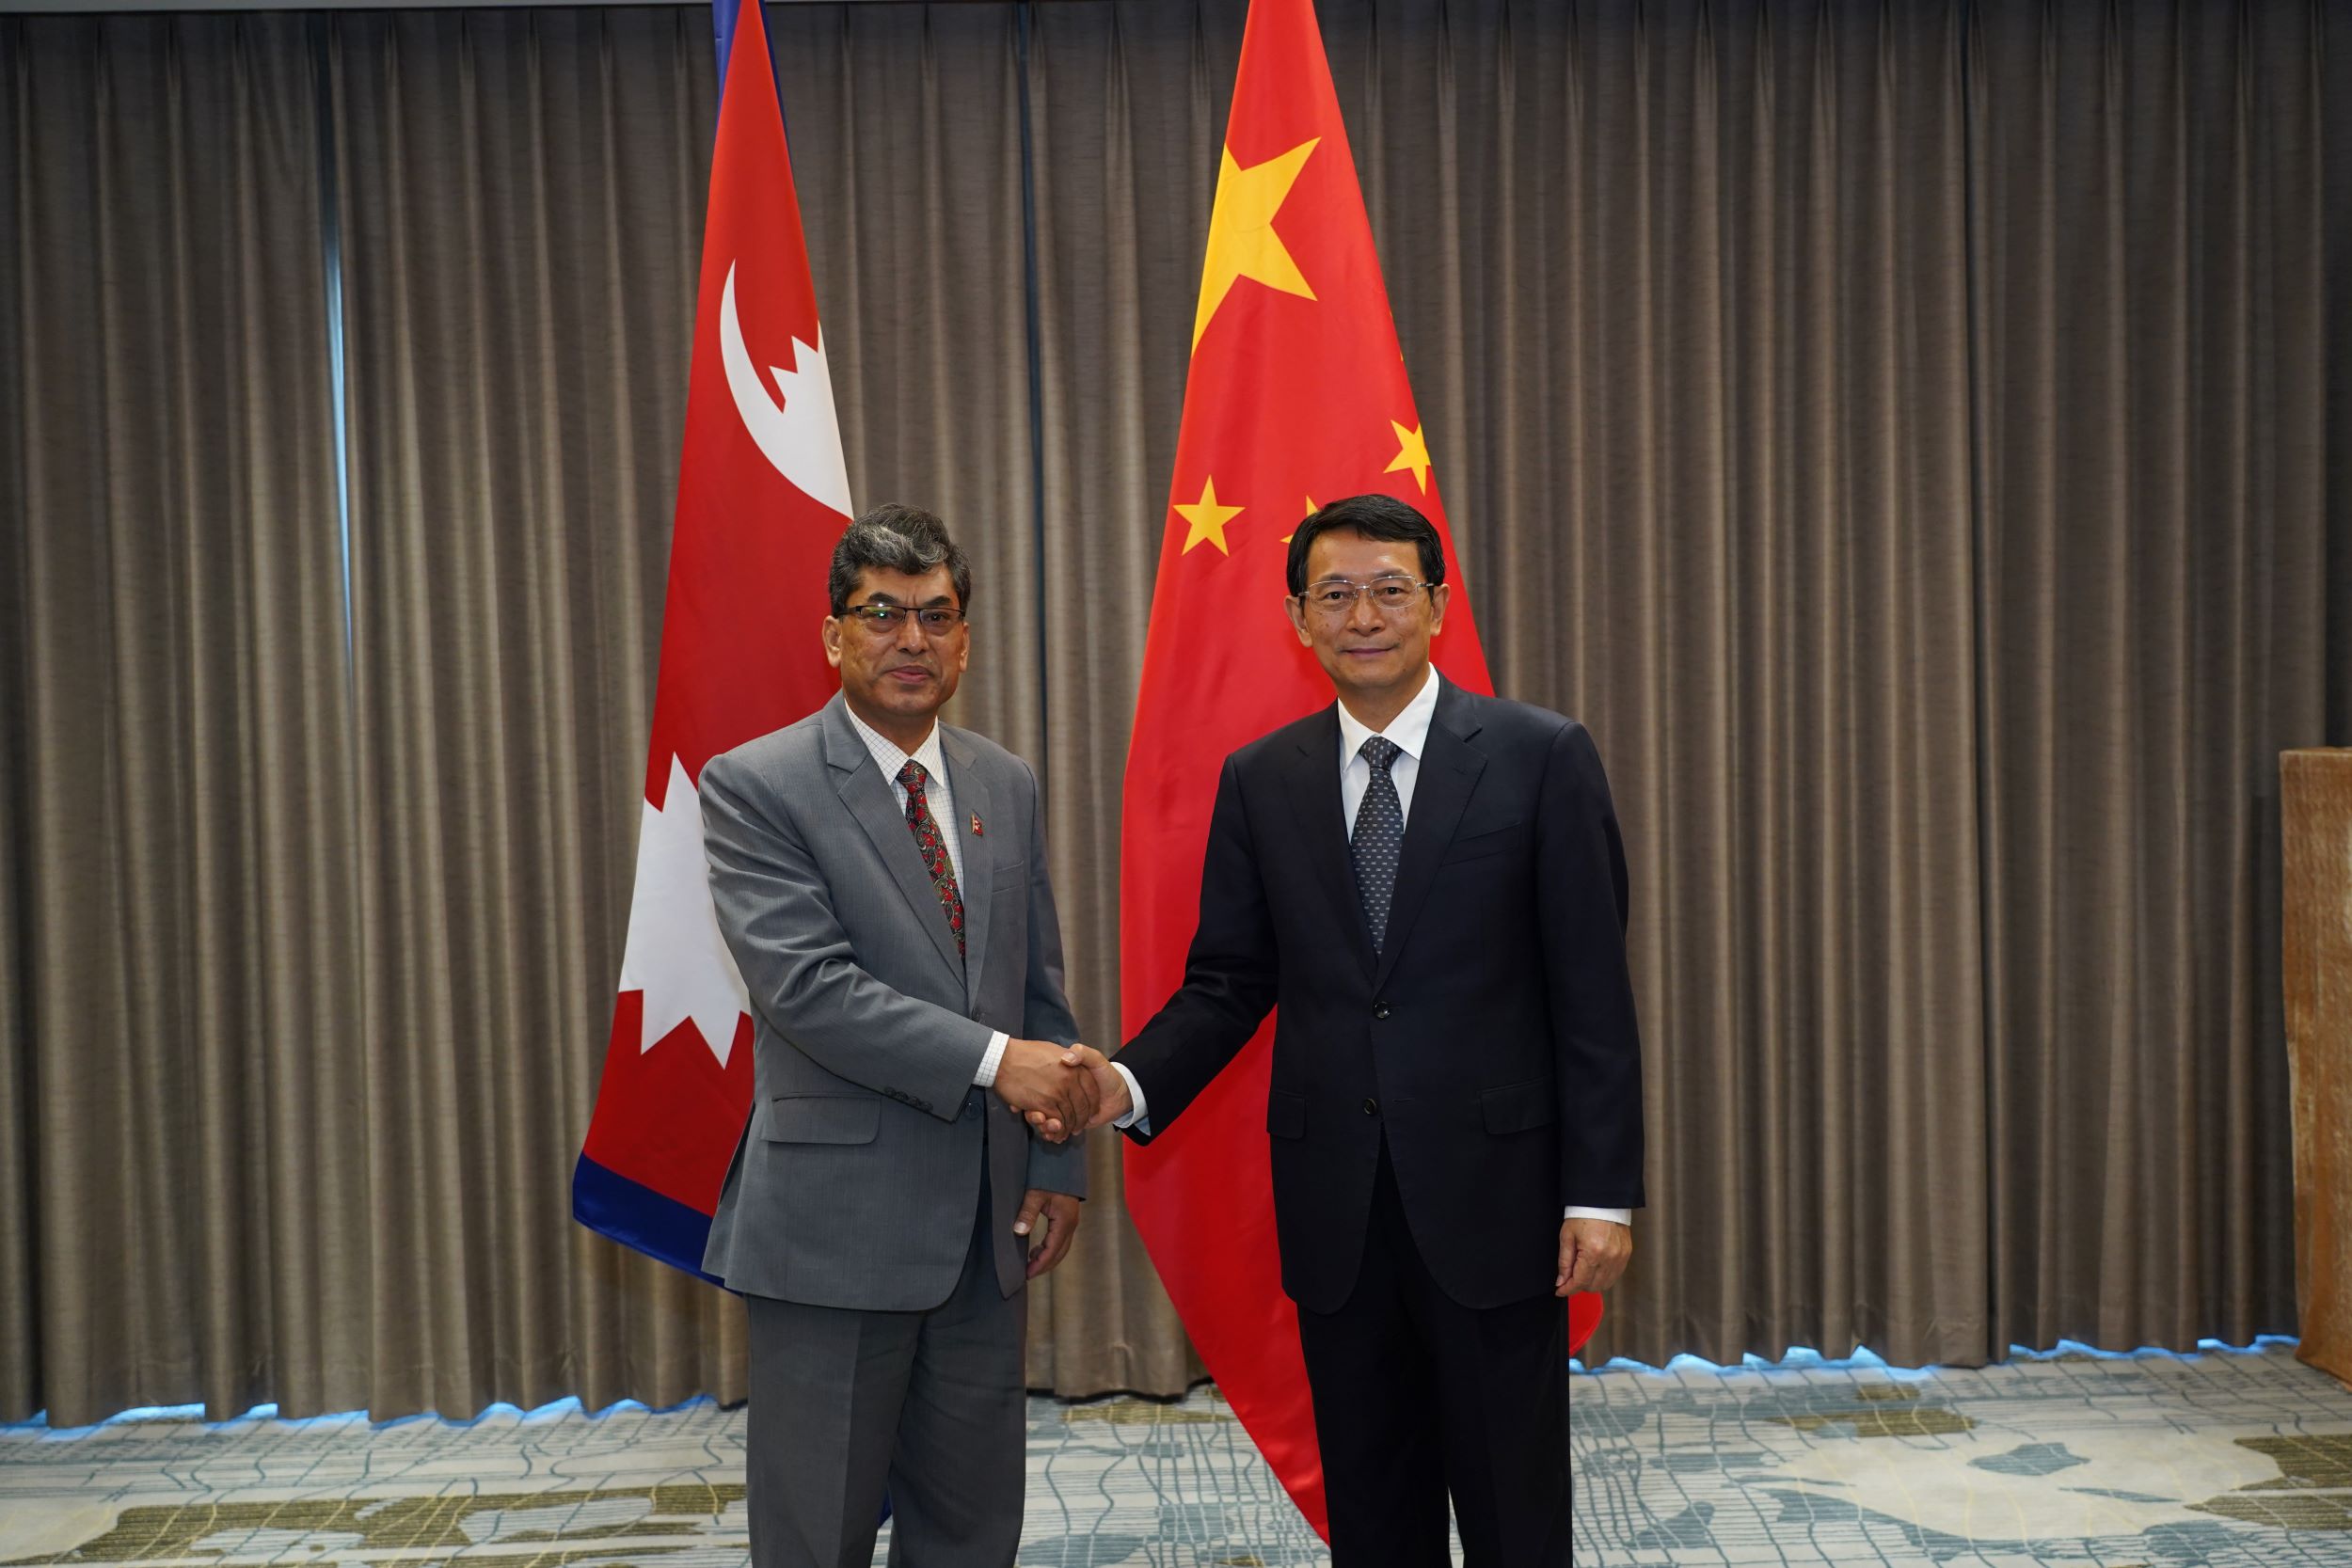 Nepal and China agree to expedite pending projects